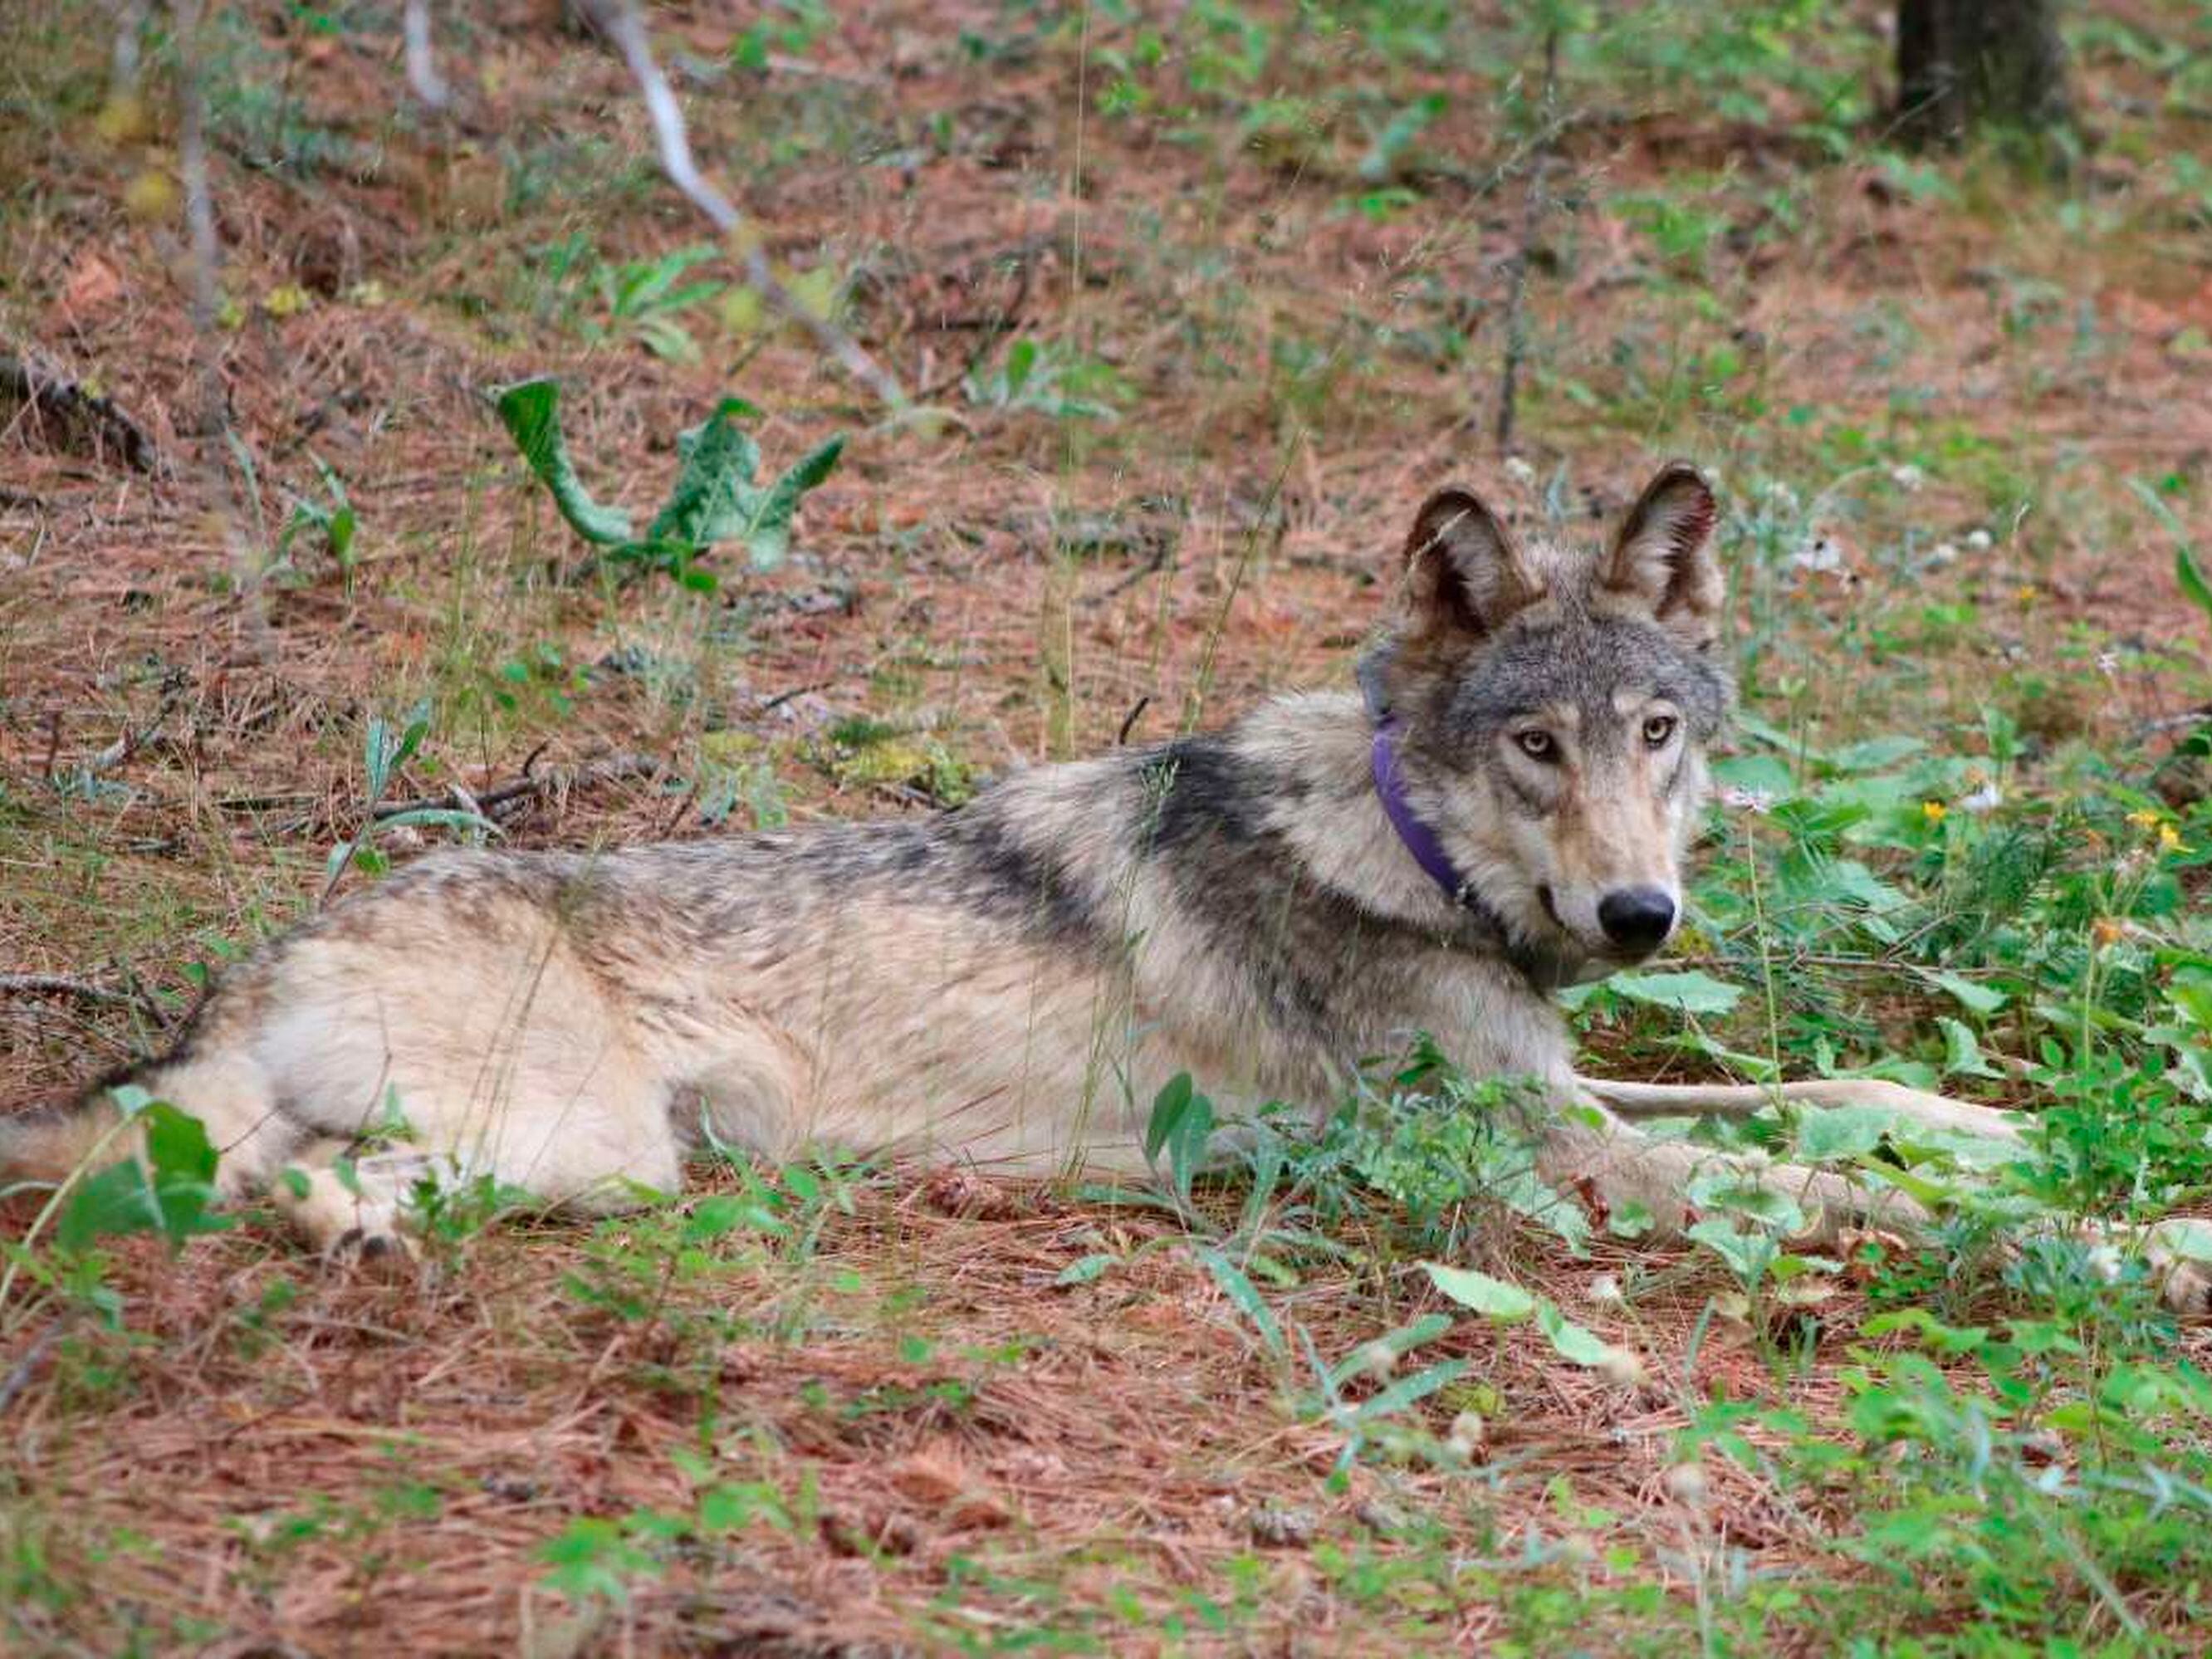 This February 2021 photo released by the California Department of Fish and Wildlife shows a protected gray wolf near Yosemite, Calif.